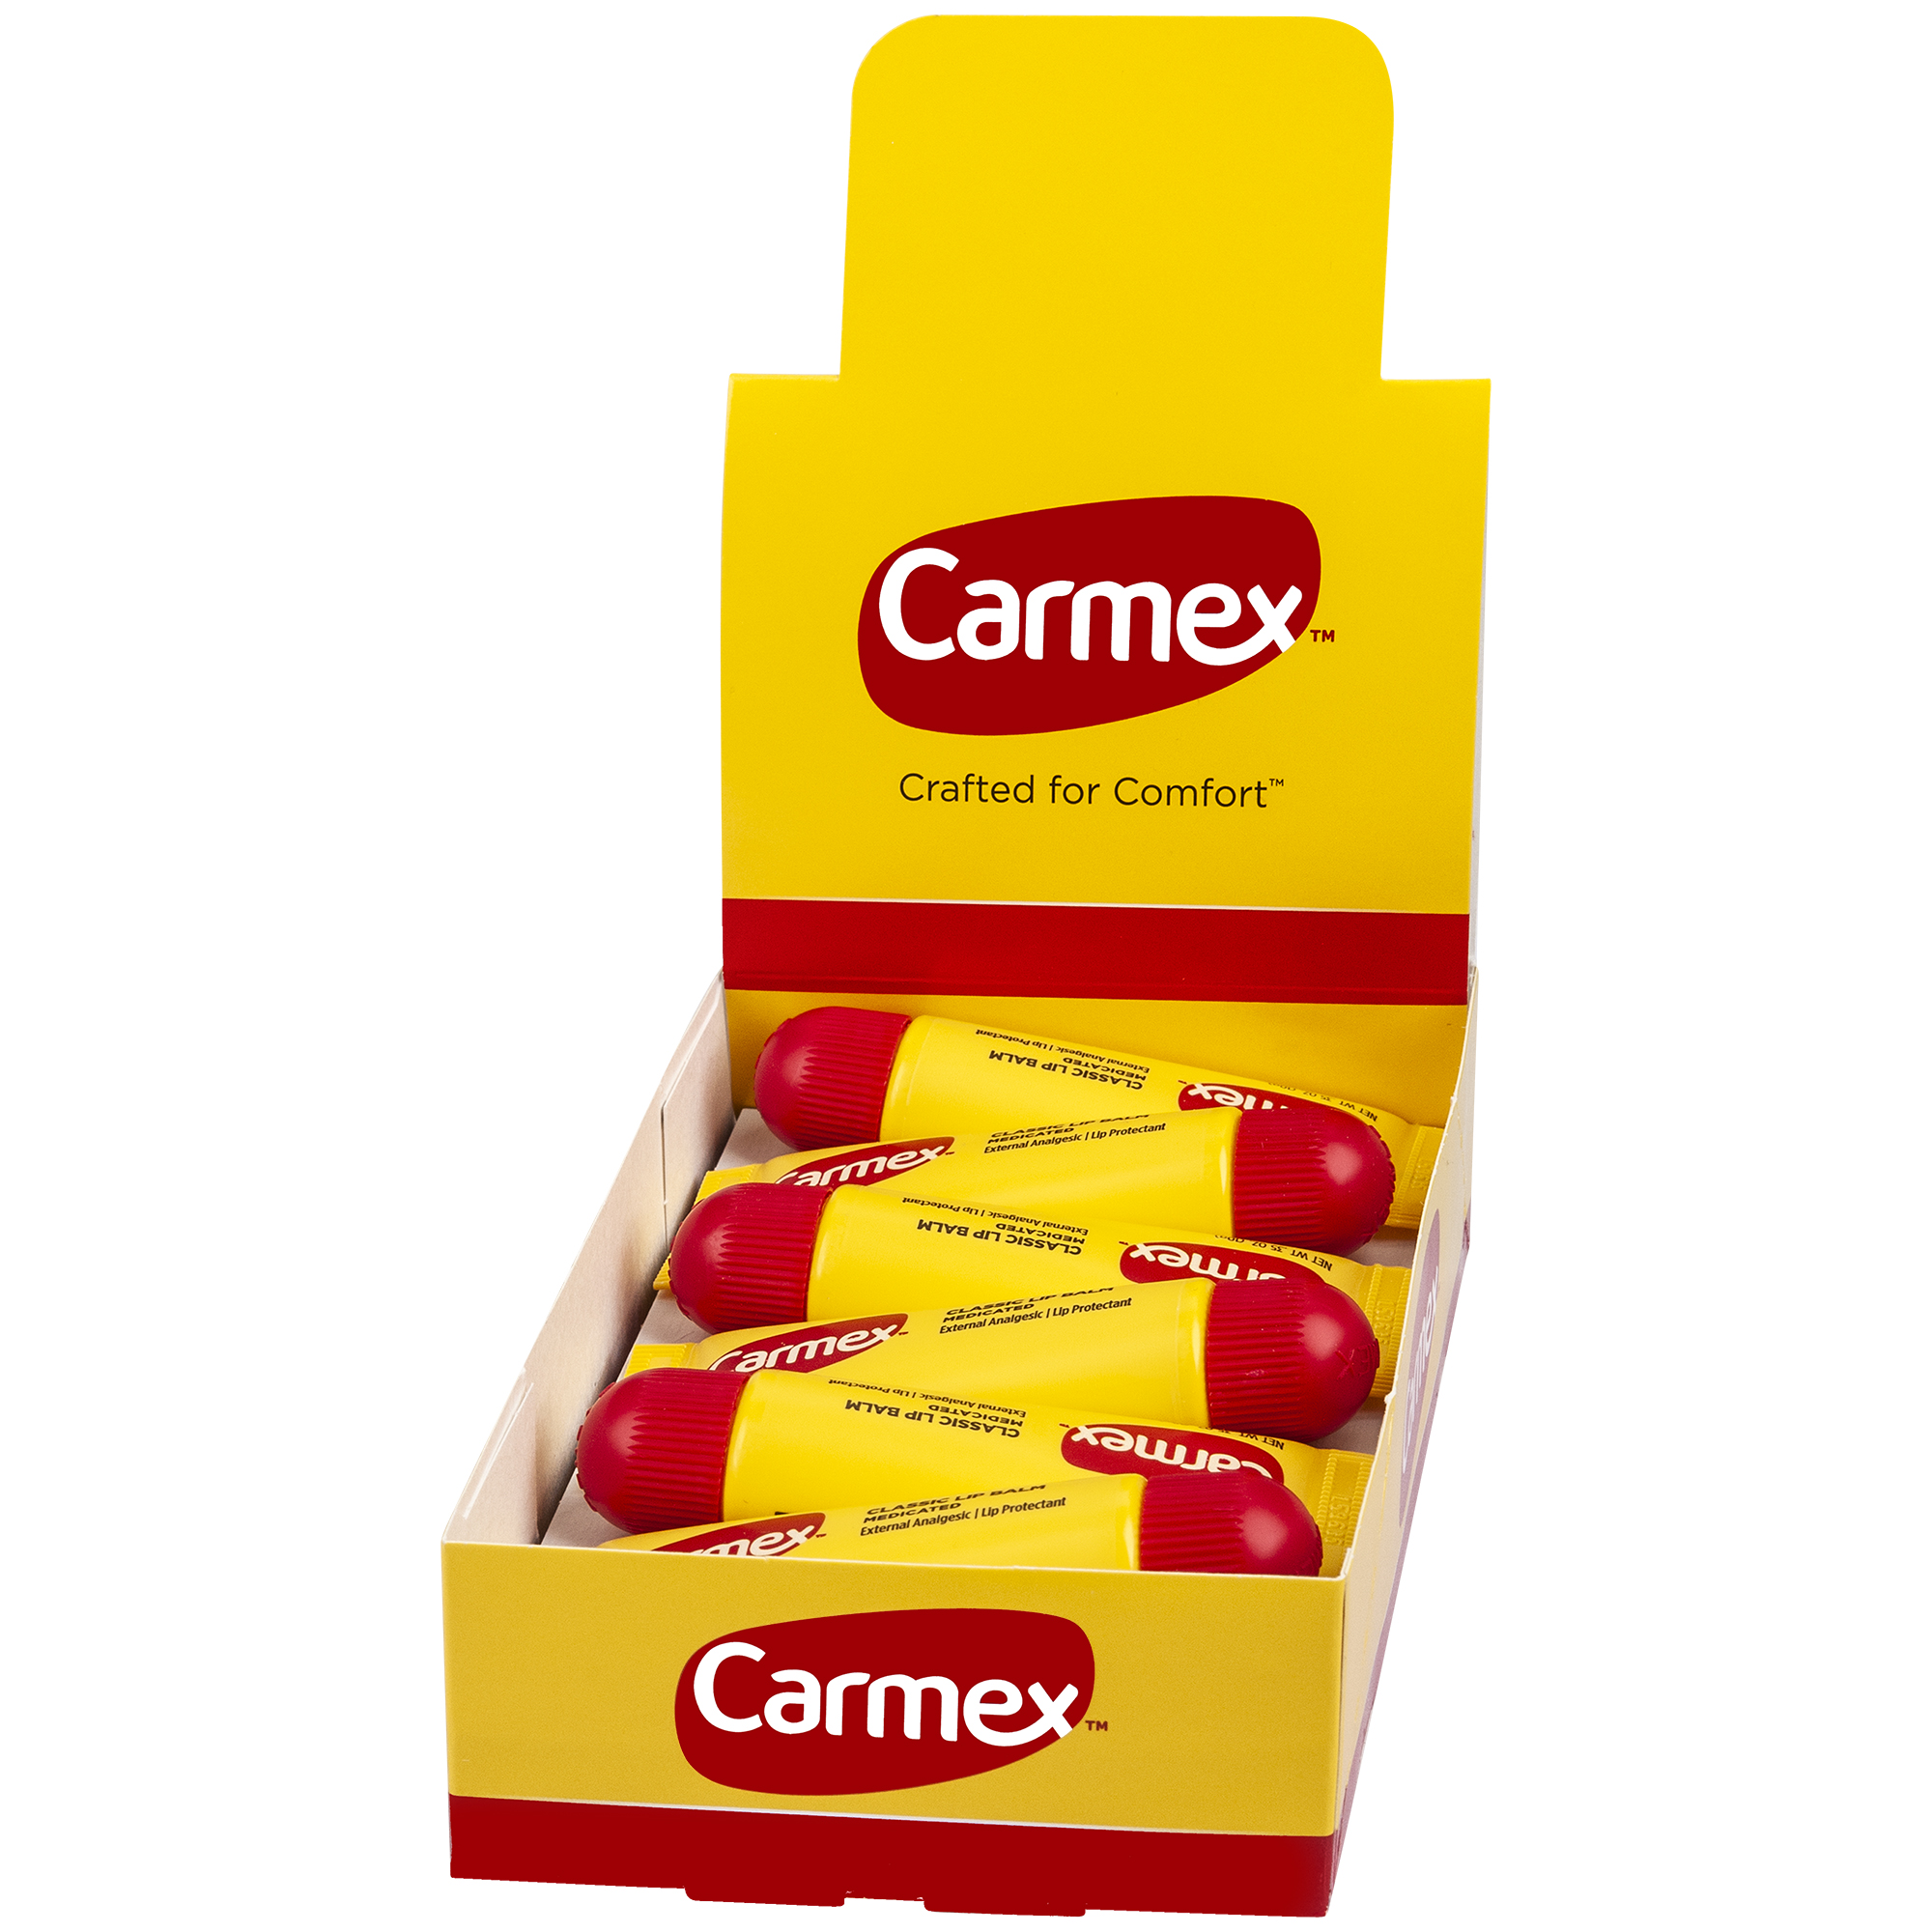 Carmex Classic Medicated Lip Balm Tube, Retail Ready Tray, 12 Count - image 1 of 6